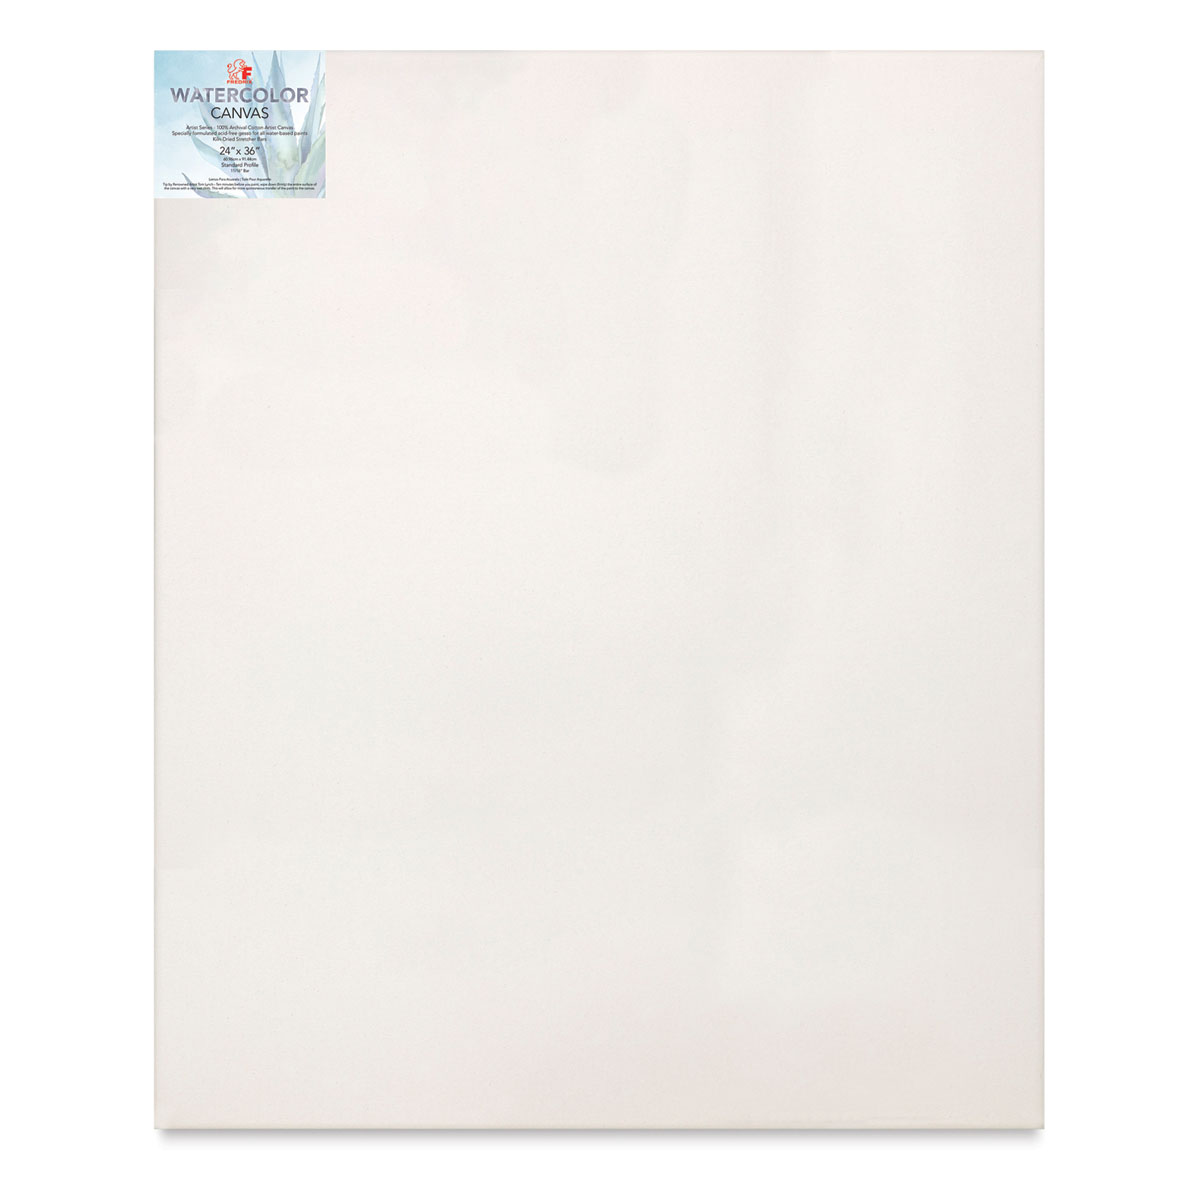 PHOENIX Watercolor Stretched Canvases, 8x10 Inch/4 Pack - 100% Cotton  Triple Primed White Blank Canvas for Watercolor, Gouache, Tempera, Crafts 